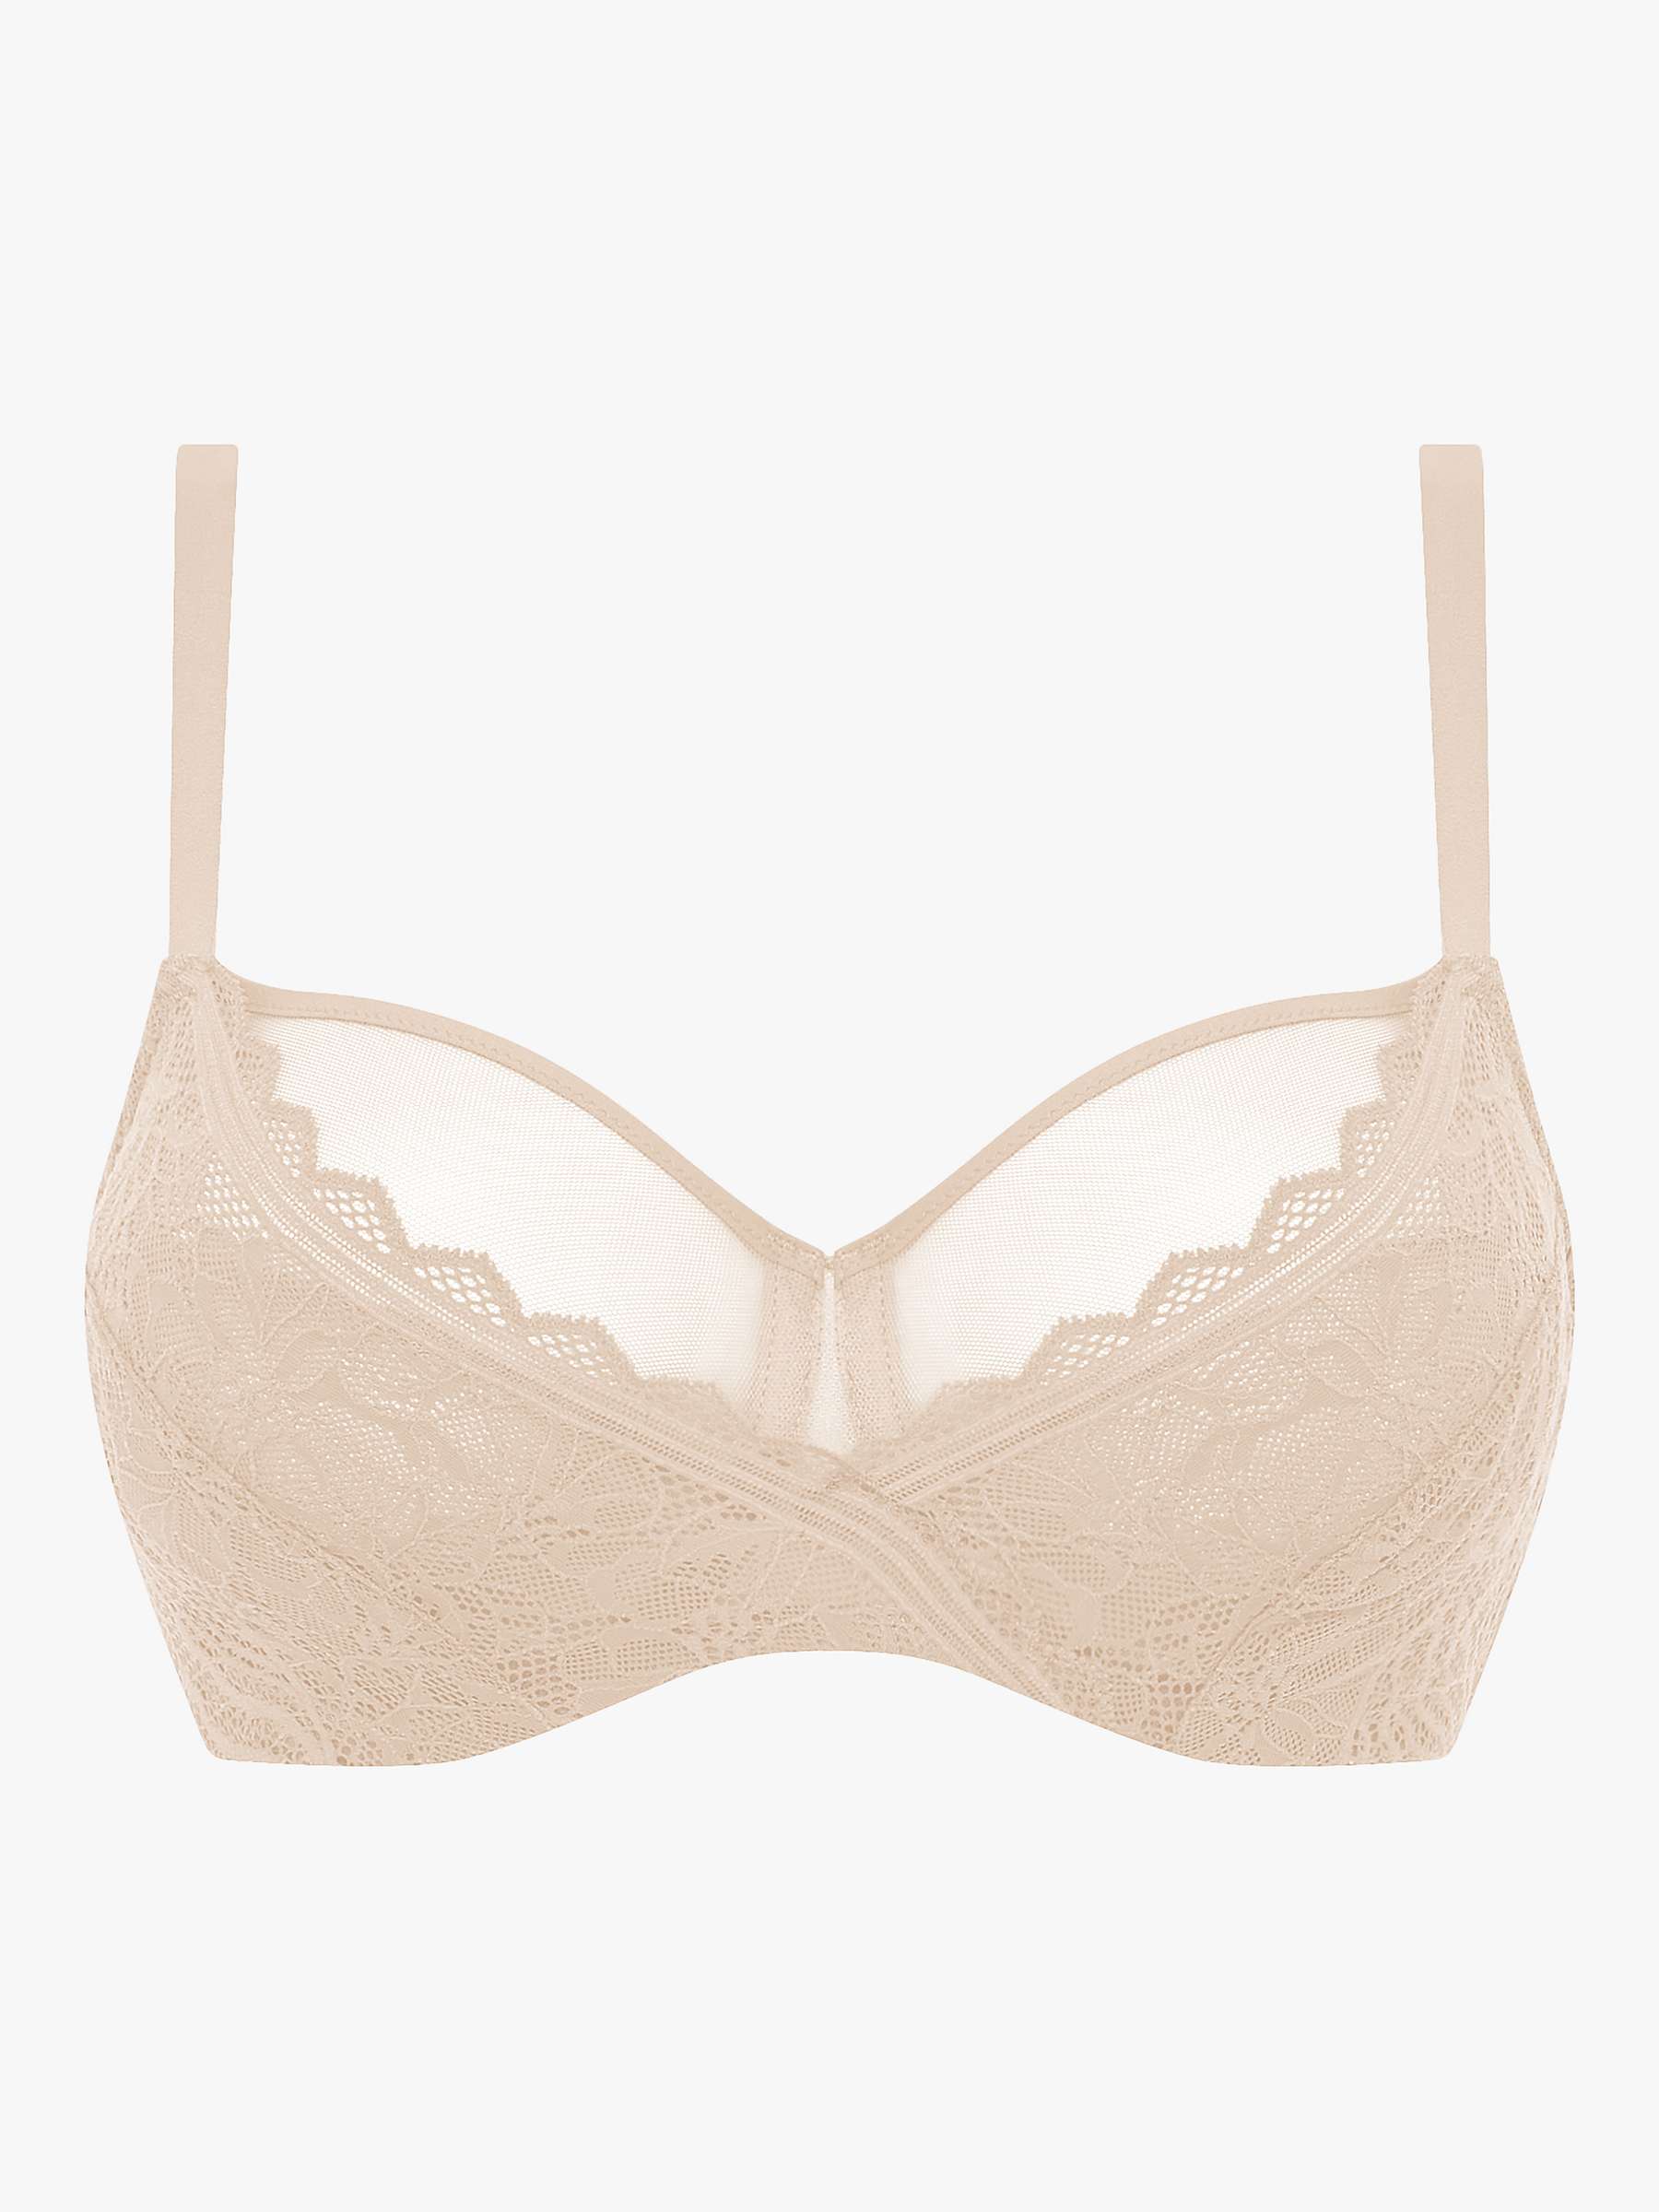 Buy Chantelle Floral Touch Full Cup Bra Online at johnlewis.com